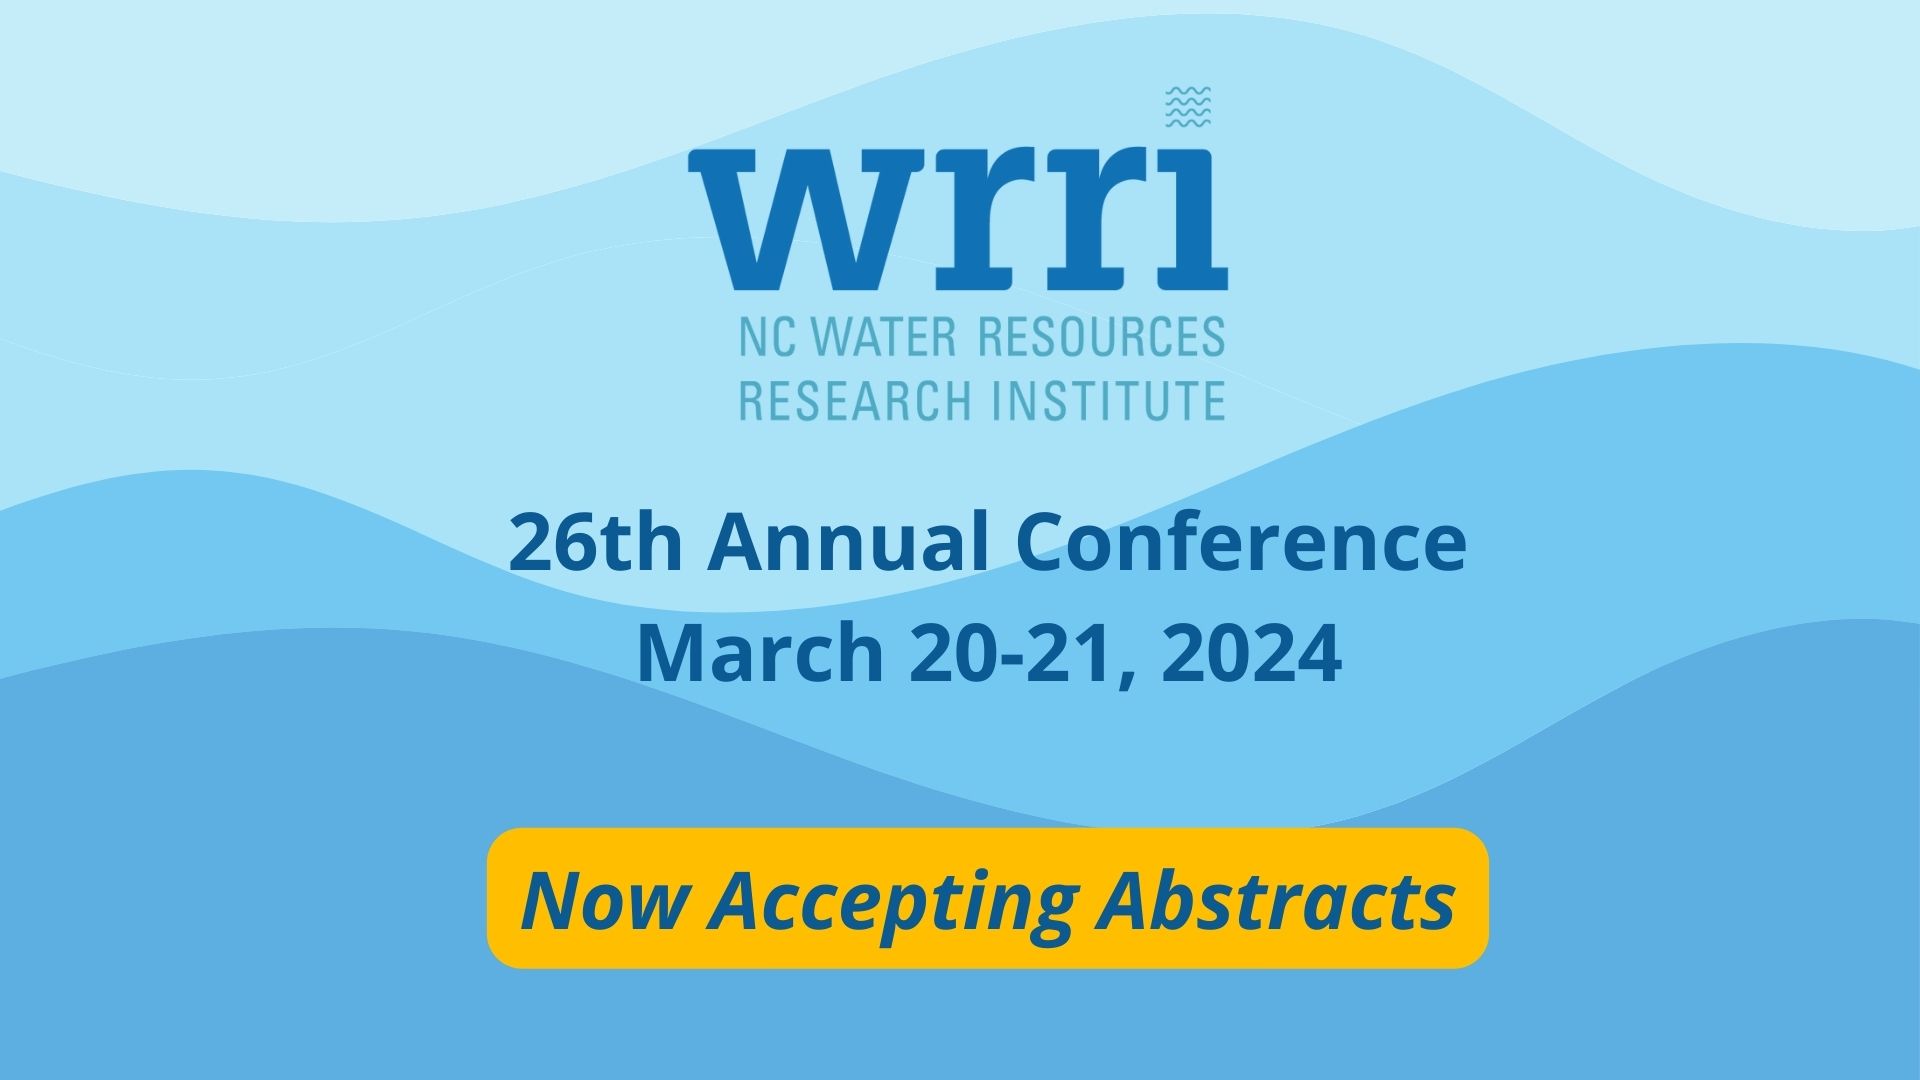 "NC Water Resources Research Institute 26th Annual Conference; March 20-21, 2024; Now Accepting Abstracts"